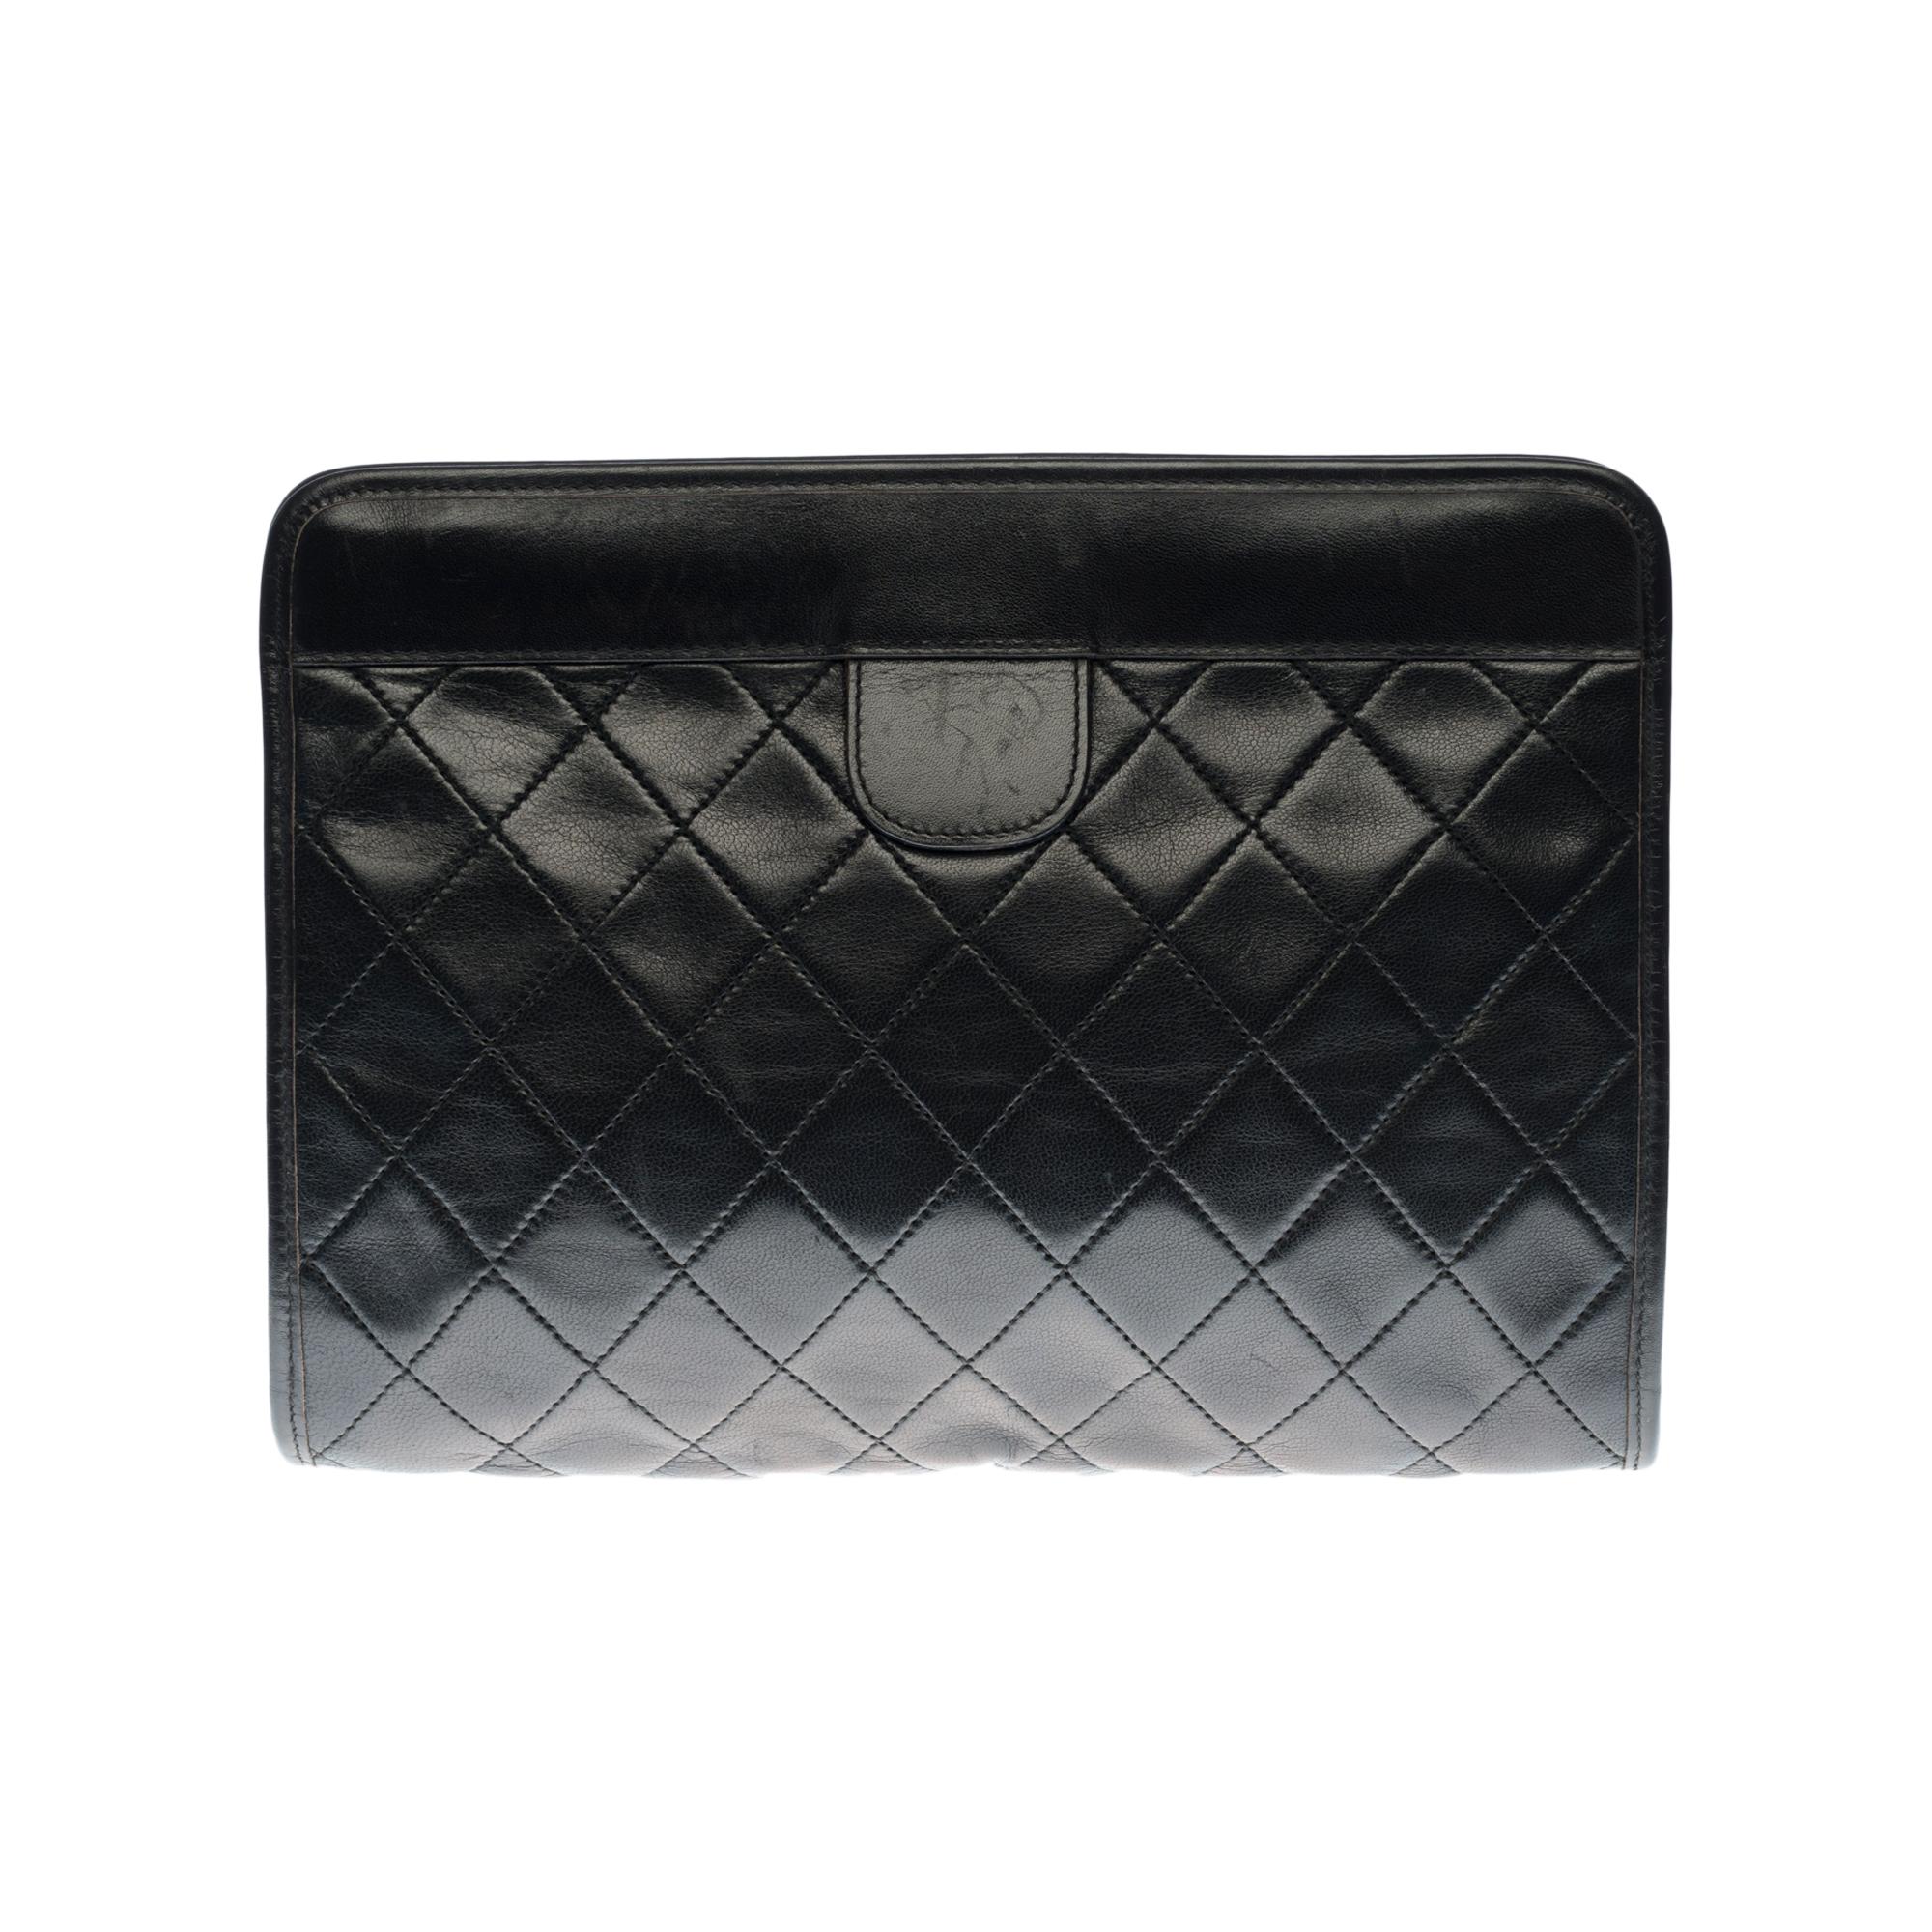 Lovely Chanel Hand Clutch/Clutch Pouch in black quilted lambskin leather, gold plated metal hardware for a handheld

Opening from the top to the top, hinges at the extremes
Gold-tone metal CC logo on black leather tab at front, black leather tab at